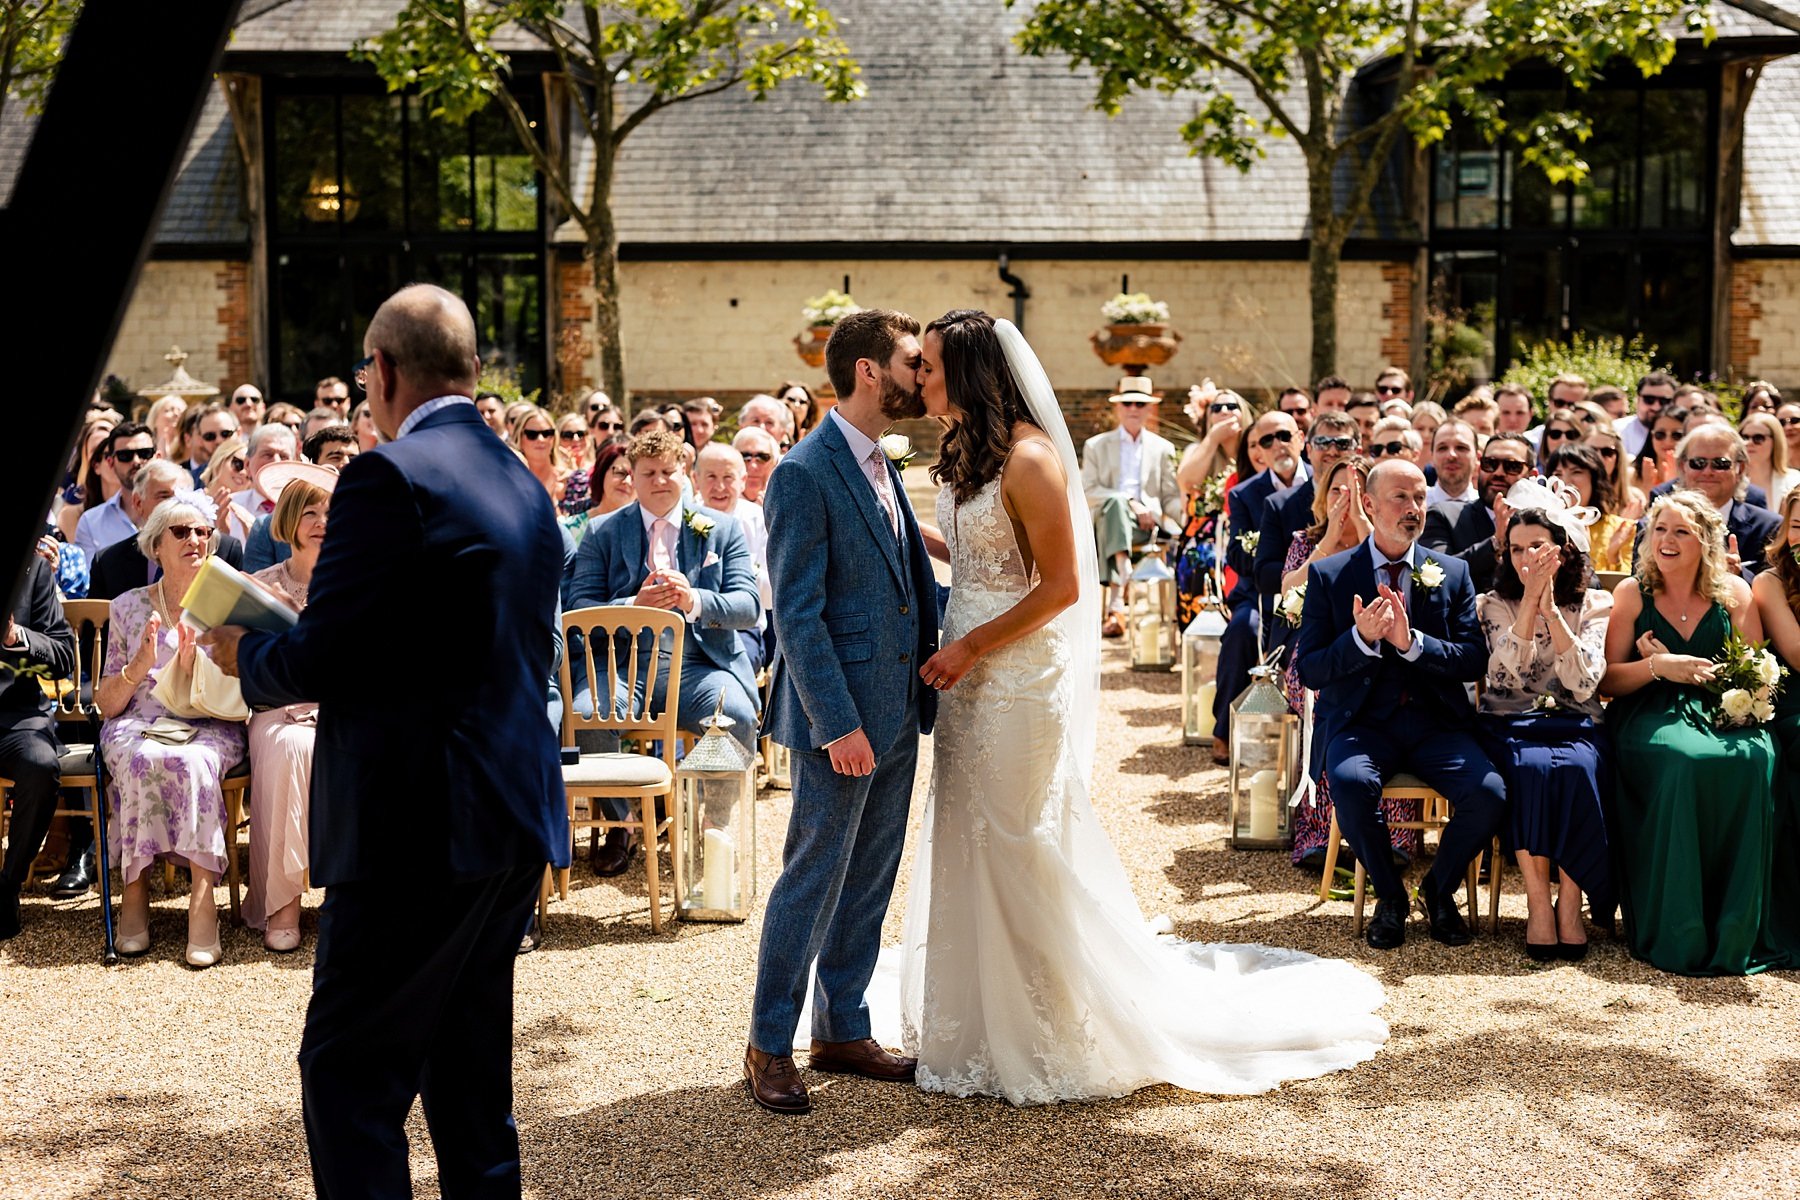 A bride and groom kiss as their guests look on in the background at their wedding ceremony